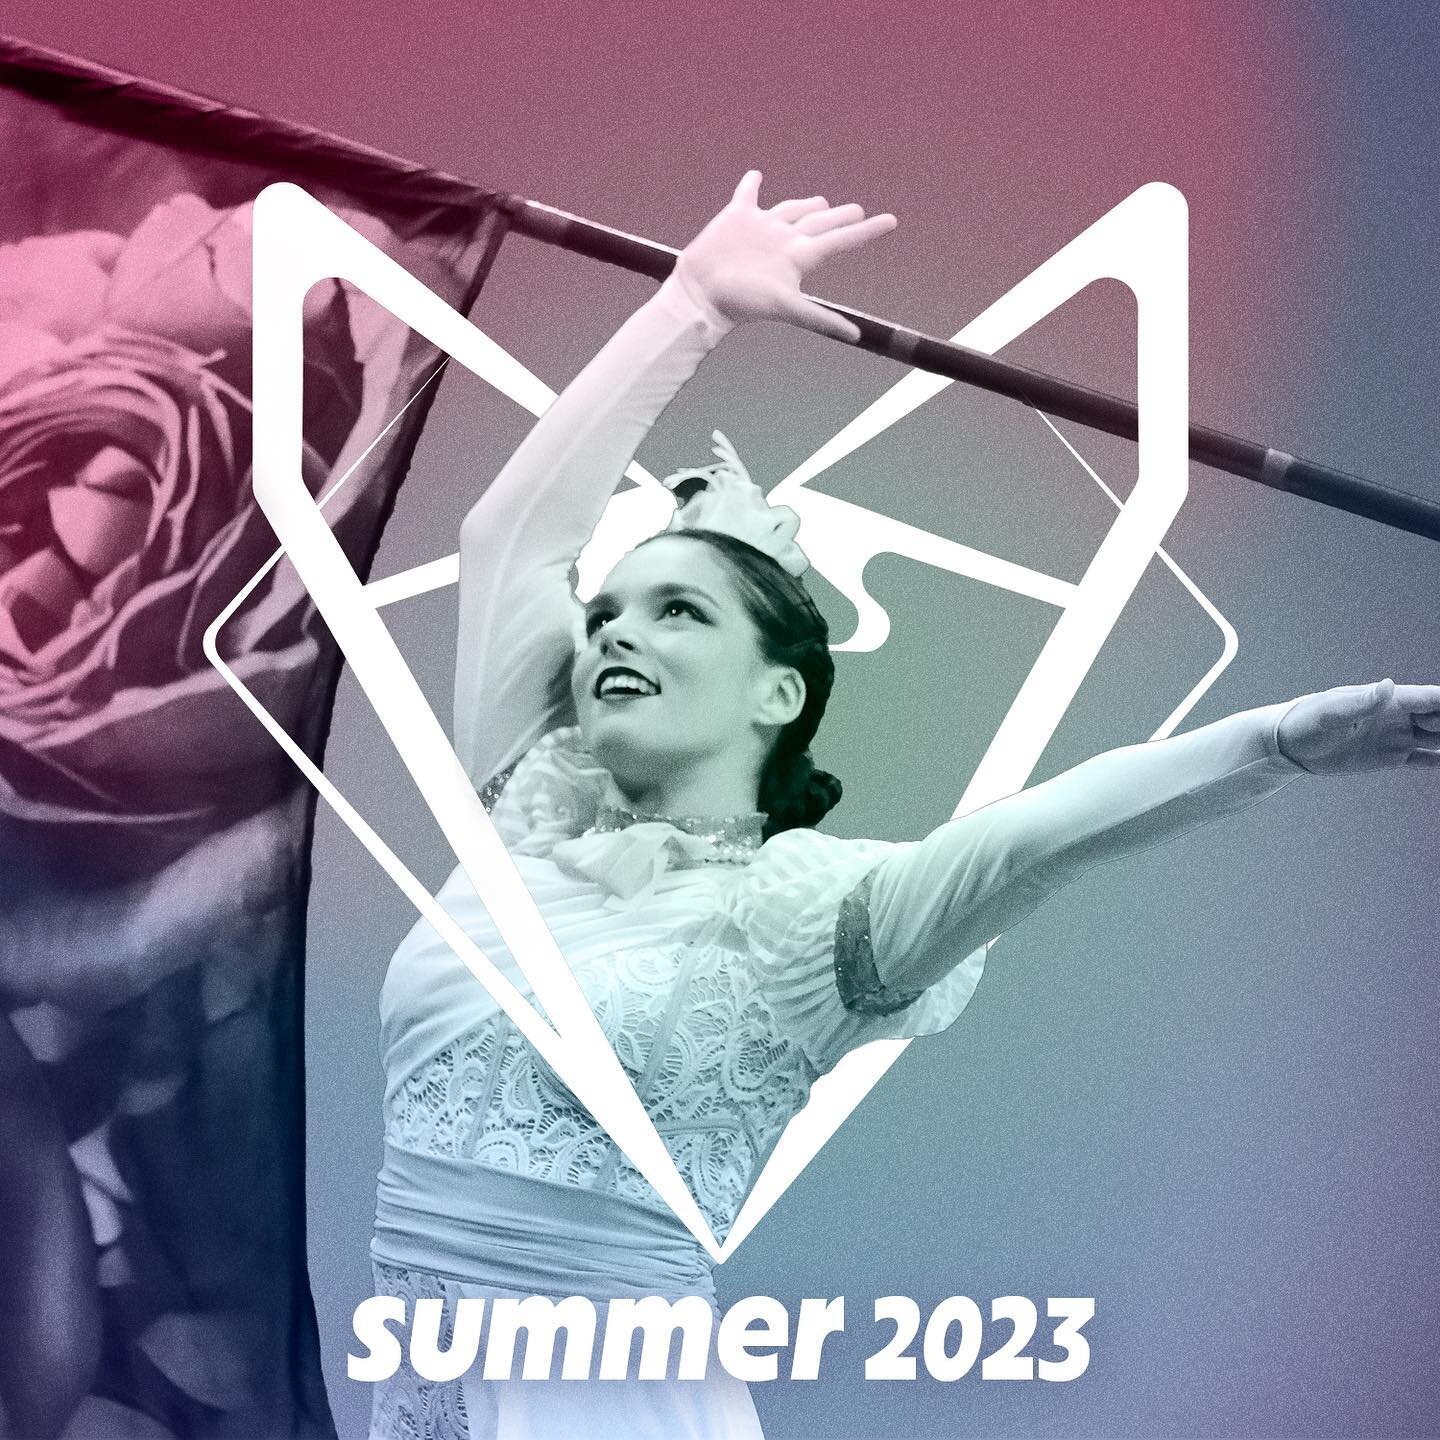 BE A VOX FOX THIS SUMMER!!!
🏖️💙🦊💙🏖️
We have many opportunities for performers of all ages &amp; skill levels to improve their abilities!!!&nbsp;&nbsp;
🏖️💙🦊💙🏖️
All ages and skill levels are welcome at our May 21st clinic. Register on our web